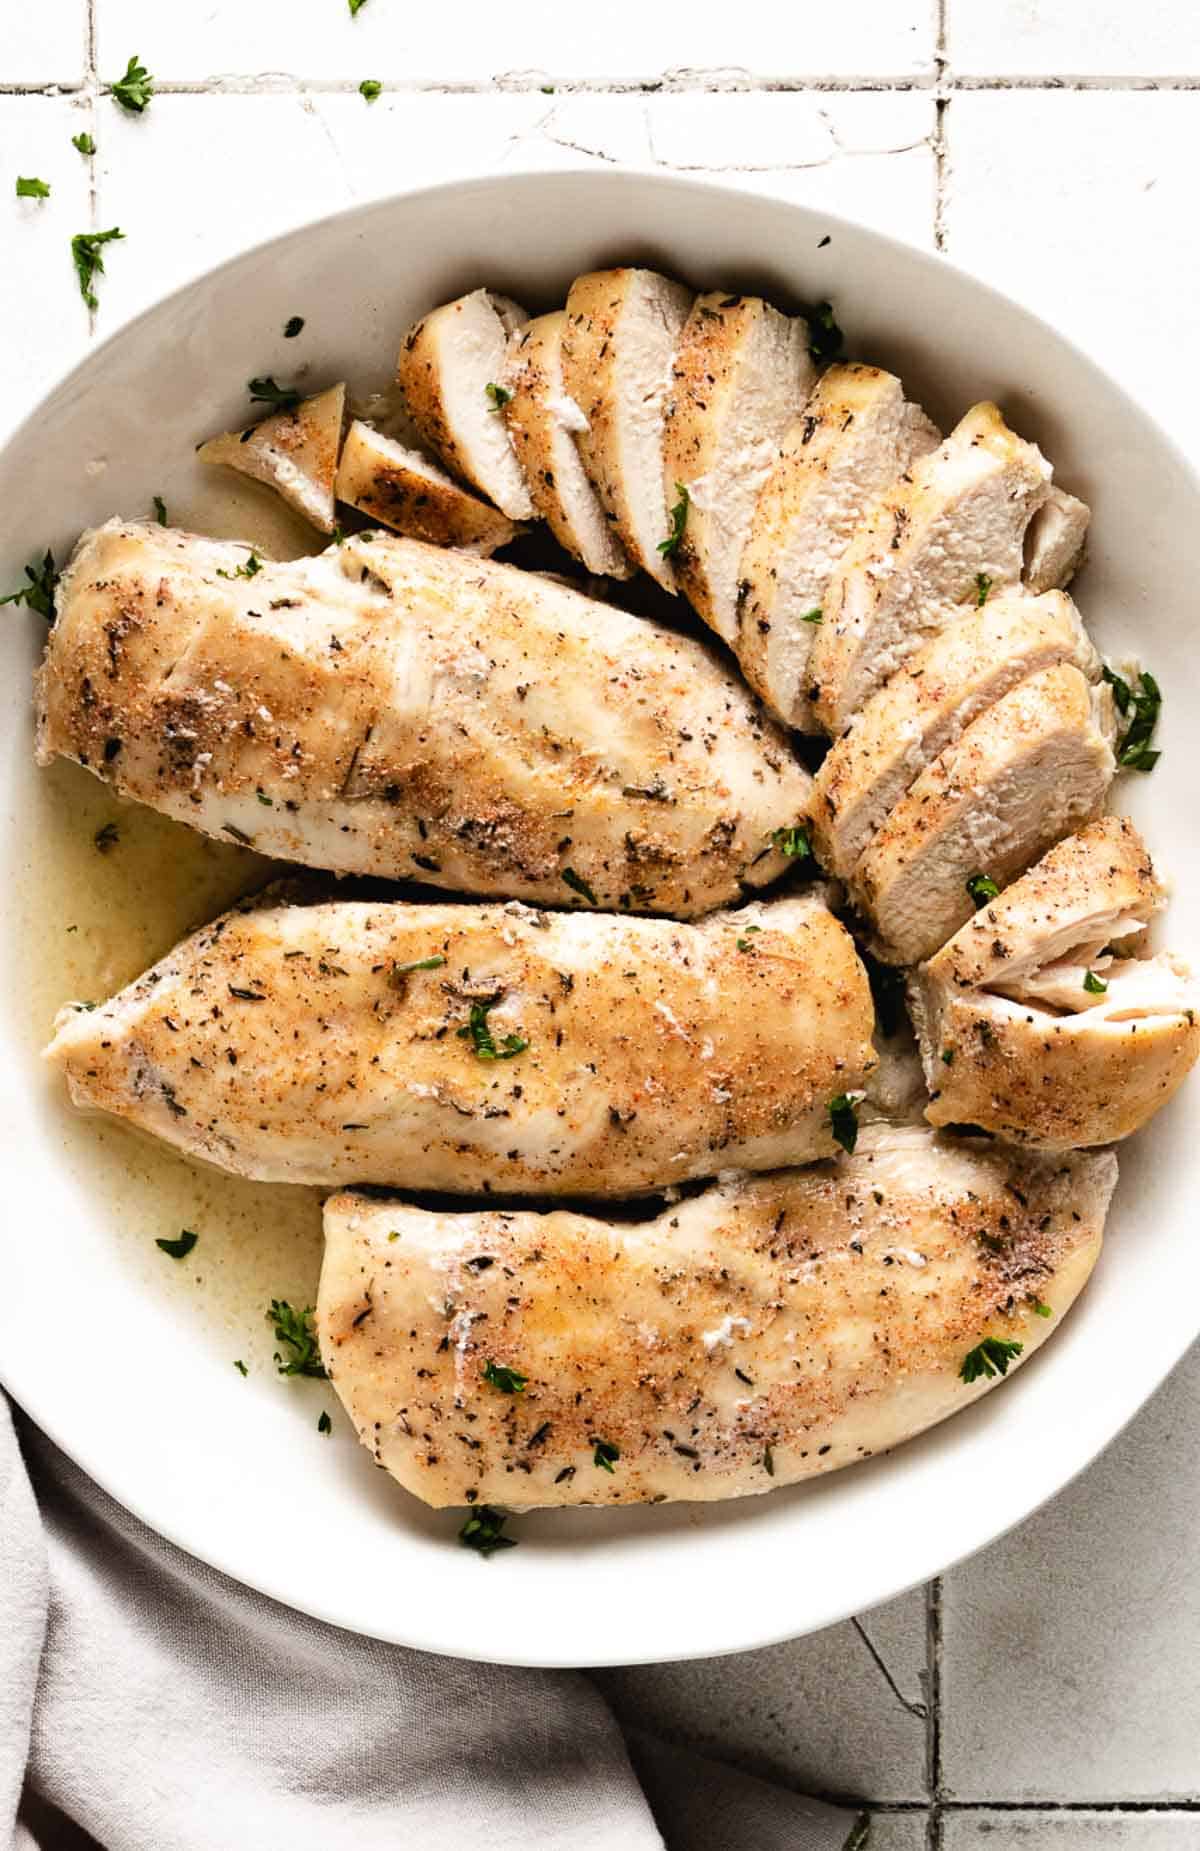 Top down view of four cooked chicken breasts in a dish.